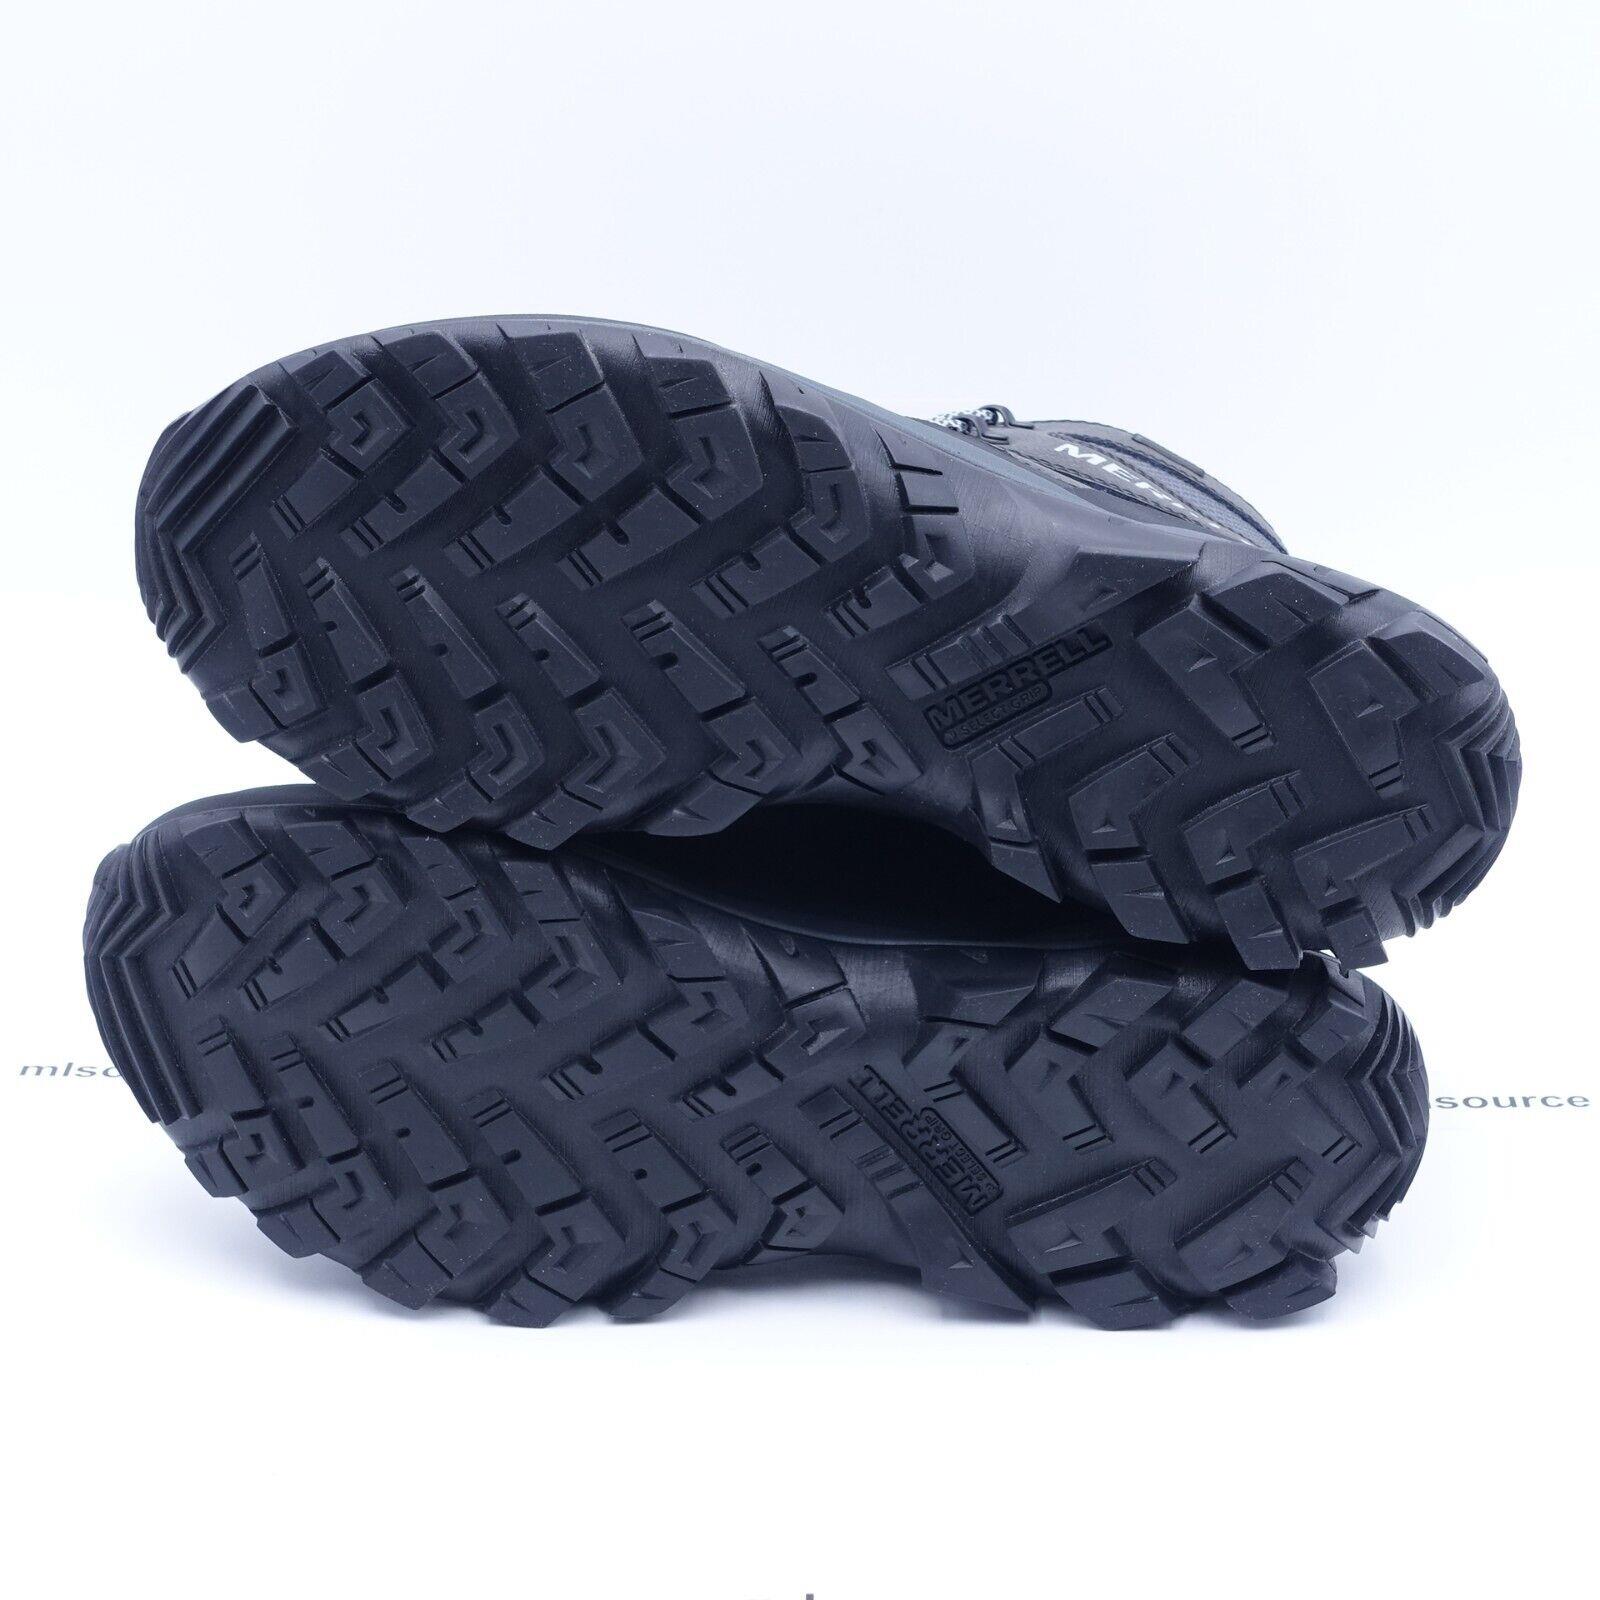 Merrell shoes Thermo Chill - Black , Black Manufacturer 5